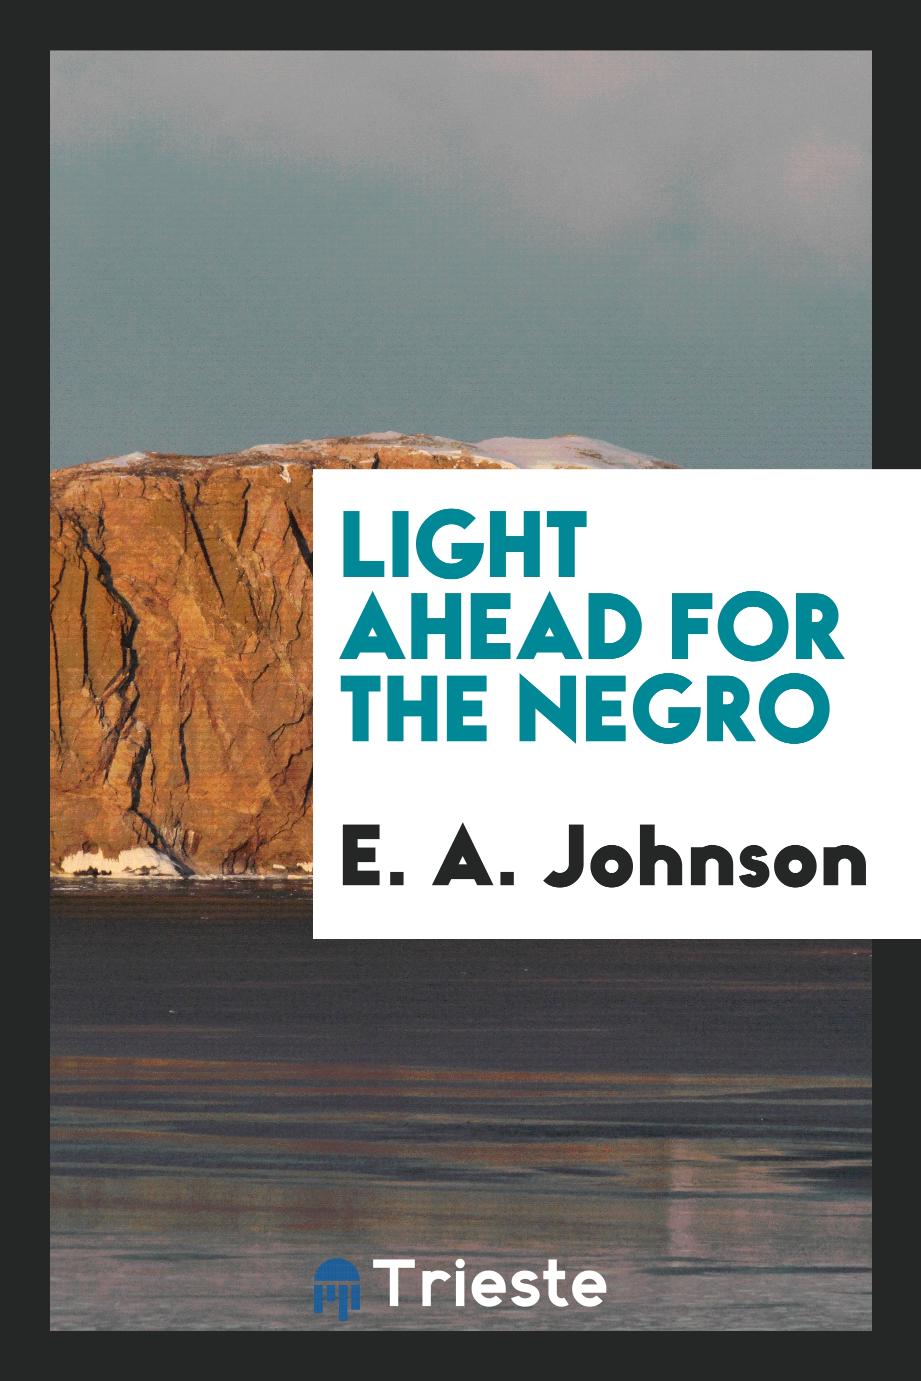 Light ahead for the Negro